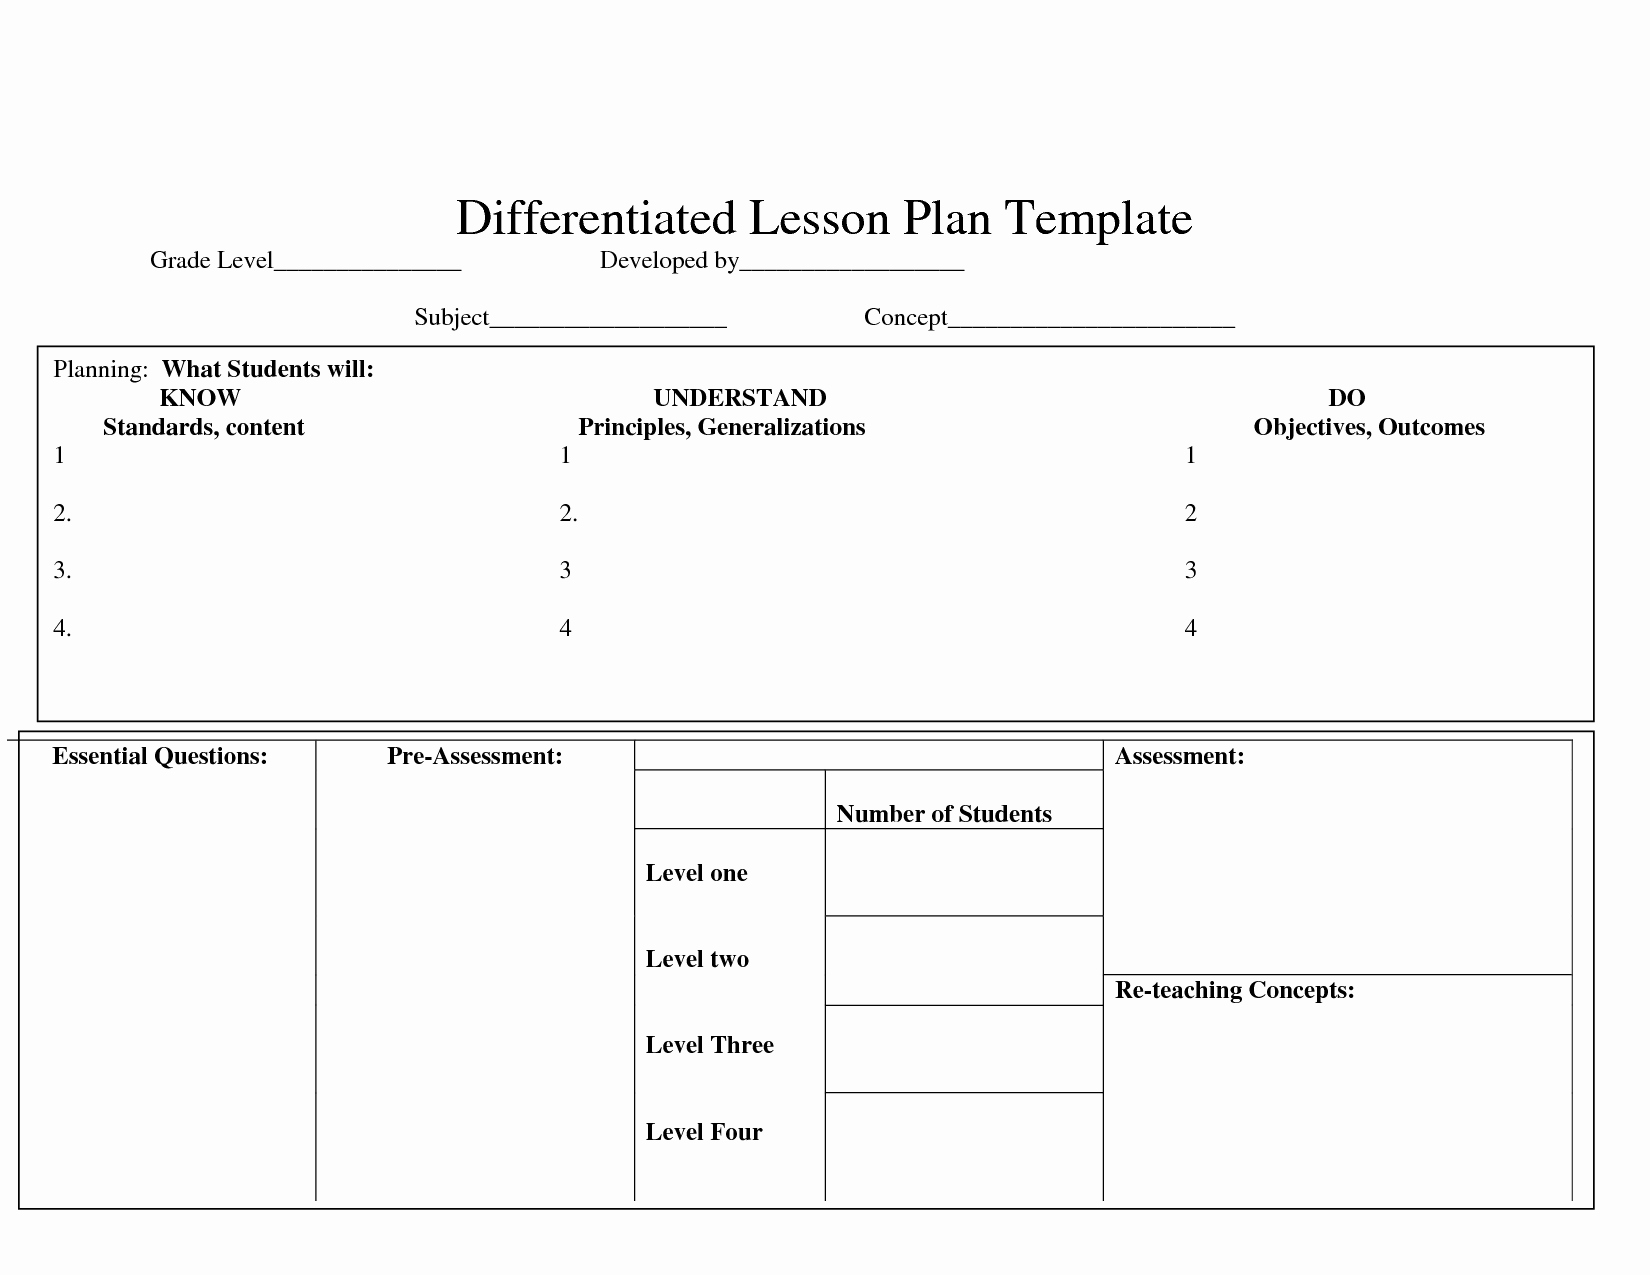 Differentiated Lesson Plan Template New Differentiatedlearning